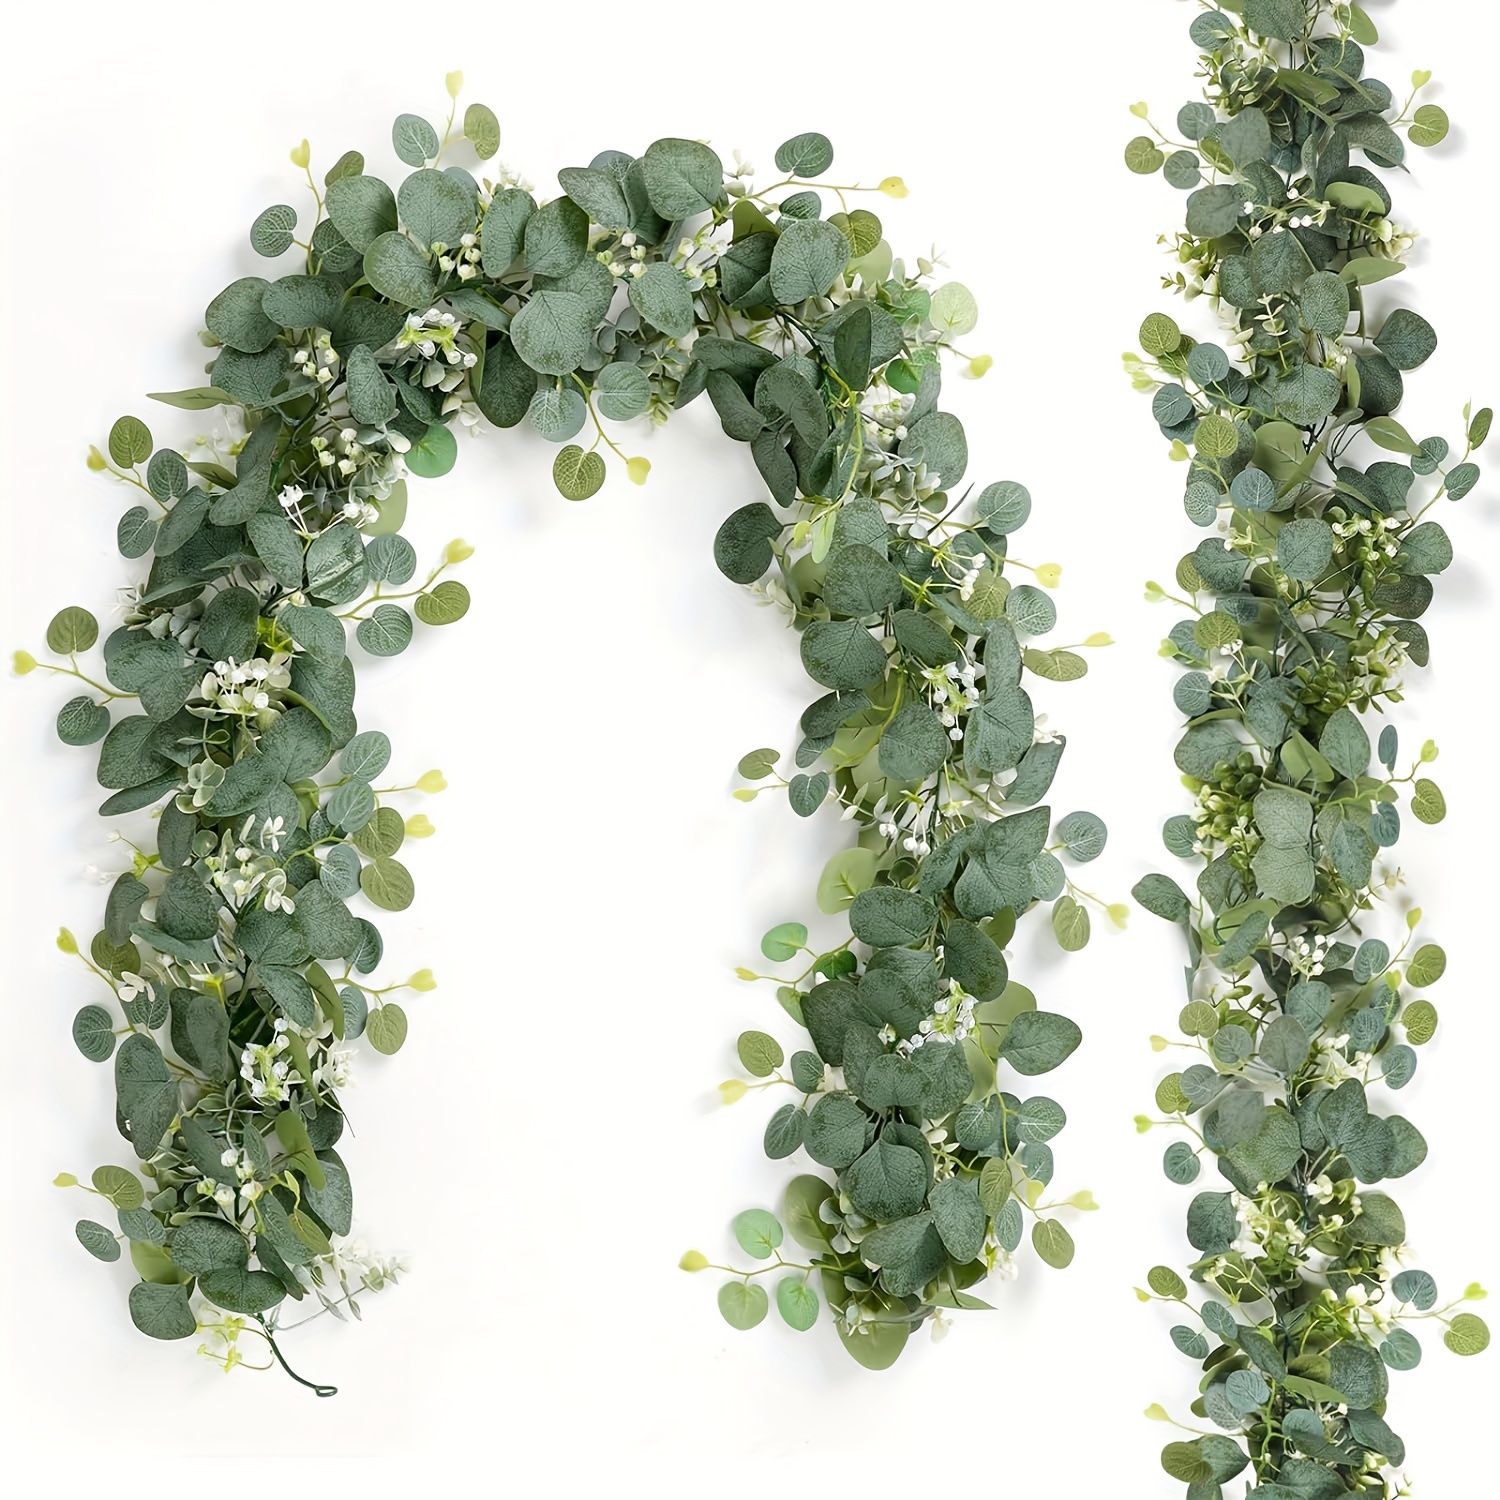 

1pc Faux Eucalyptus Garland 5.9ft, Artificial Greenery Plant With White Flowers, Rustic Boxwood Vines For Wedding, Home, Party, Table, Wall Decor, Fake Hanging Plant For Decoration